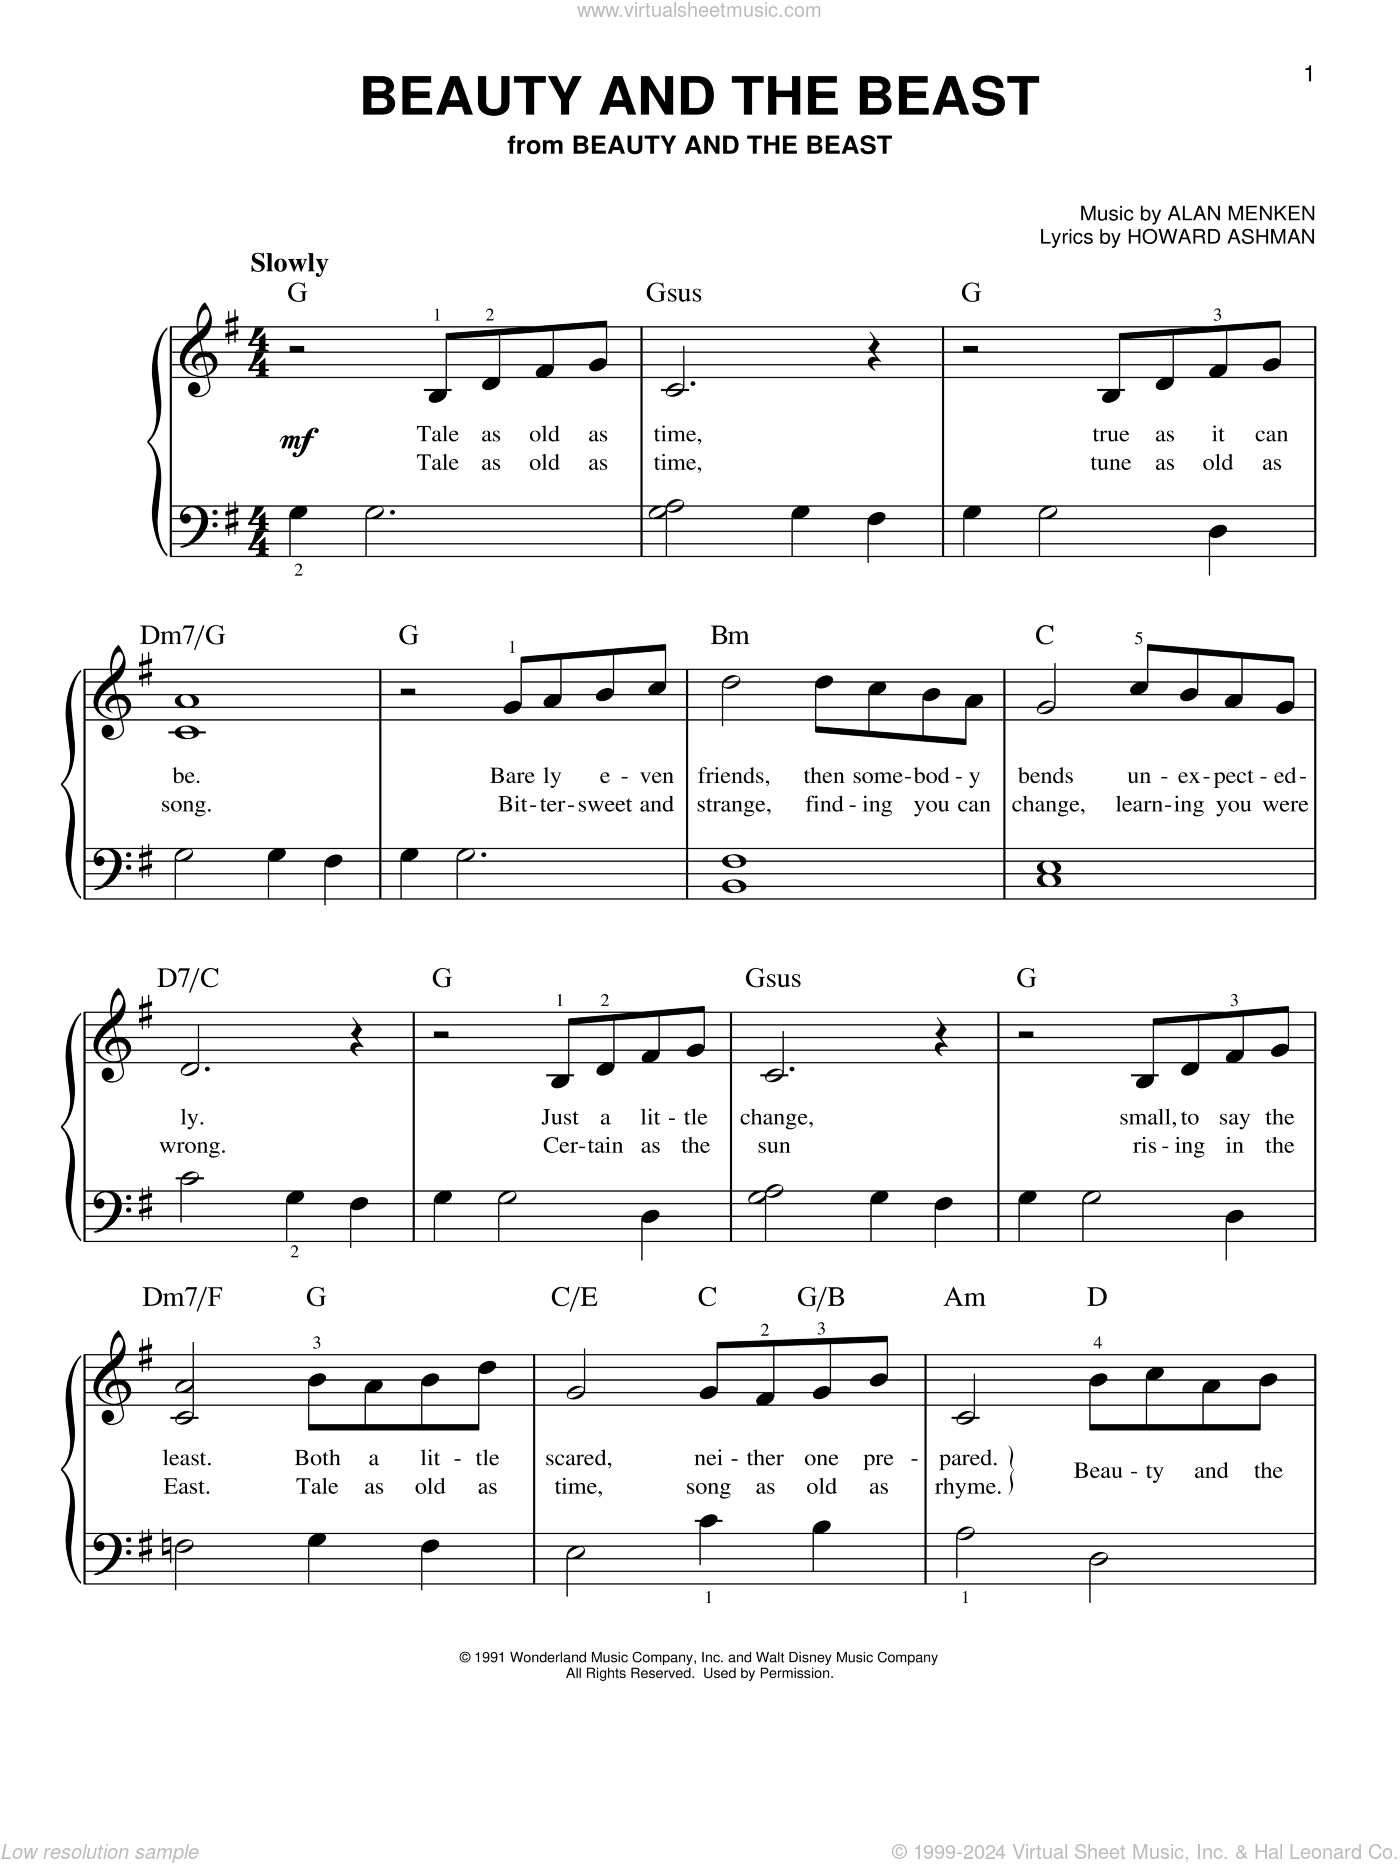 Celine Dion & Peabo Bryson: Beauty And The Beast sheet music for